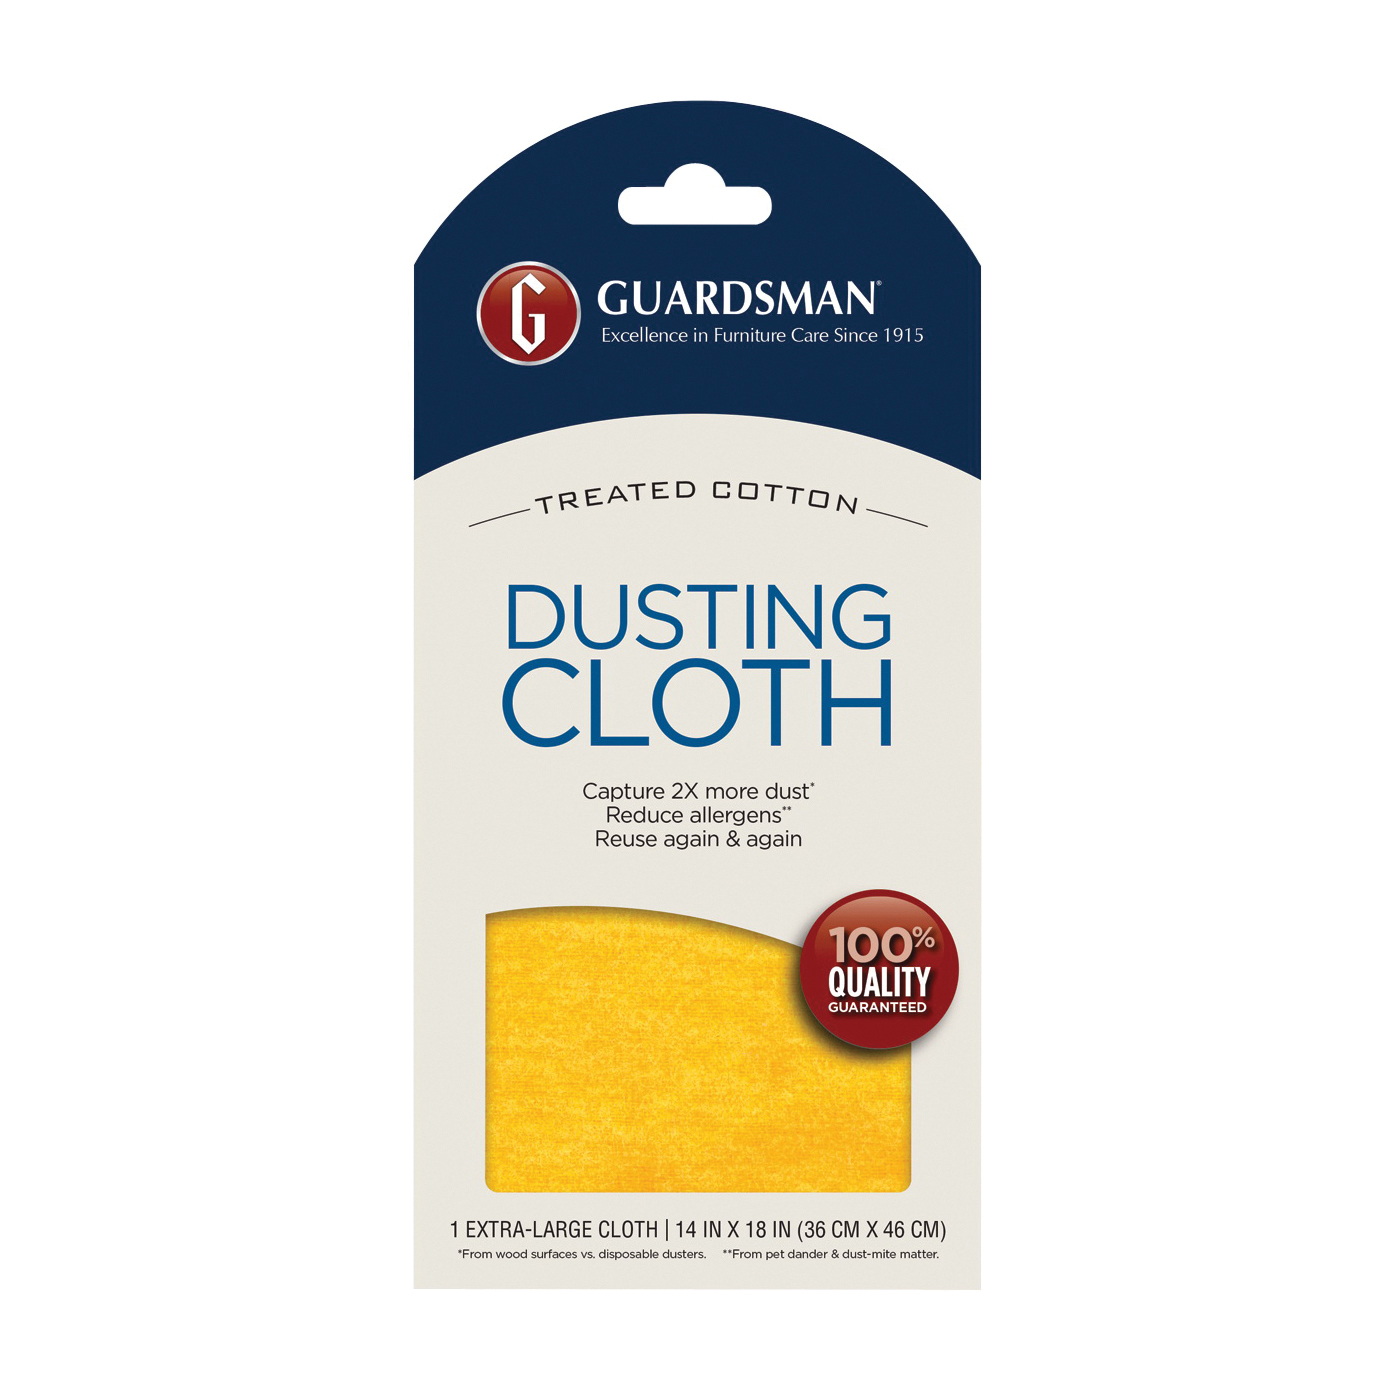 462100 Dusting Cloth, 18 in L, 14 in W, Cotton